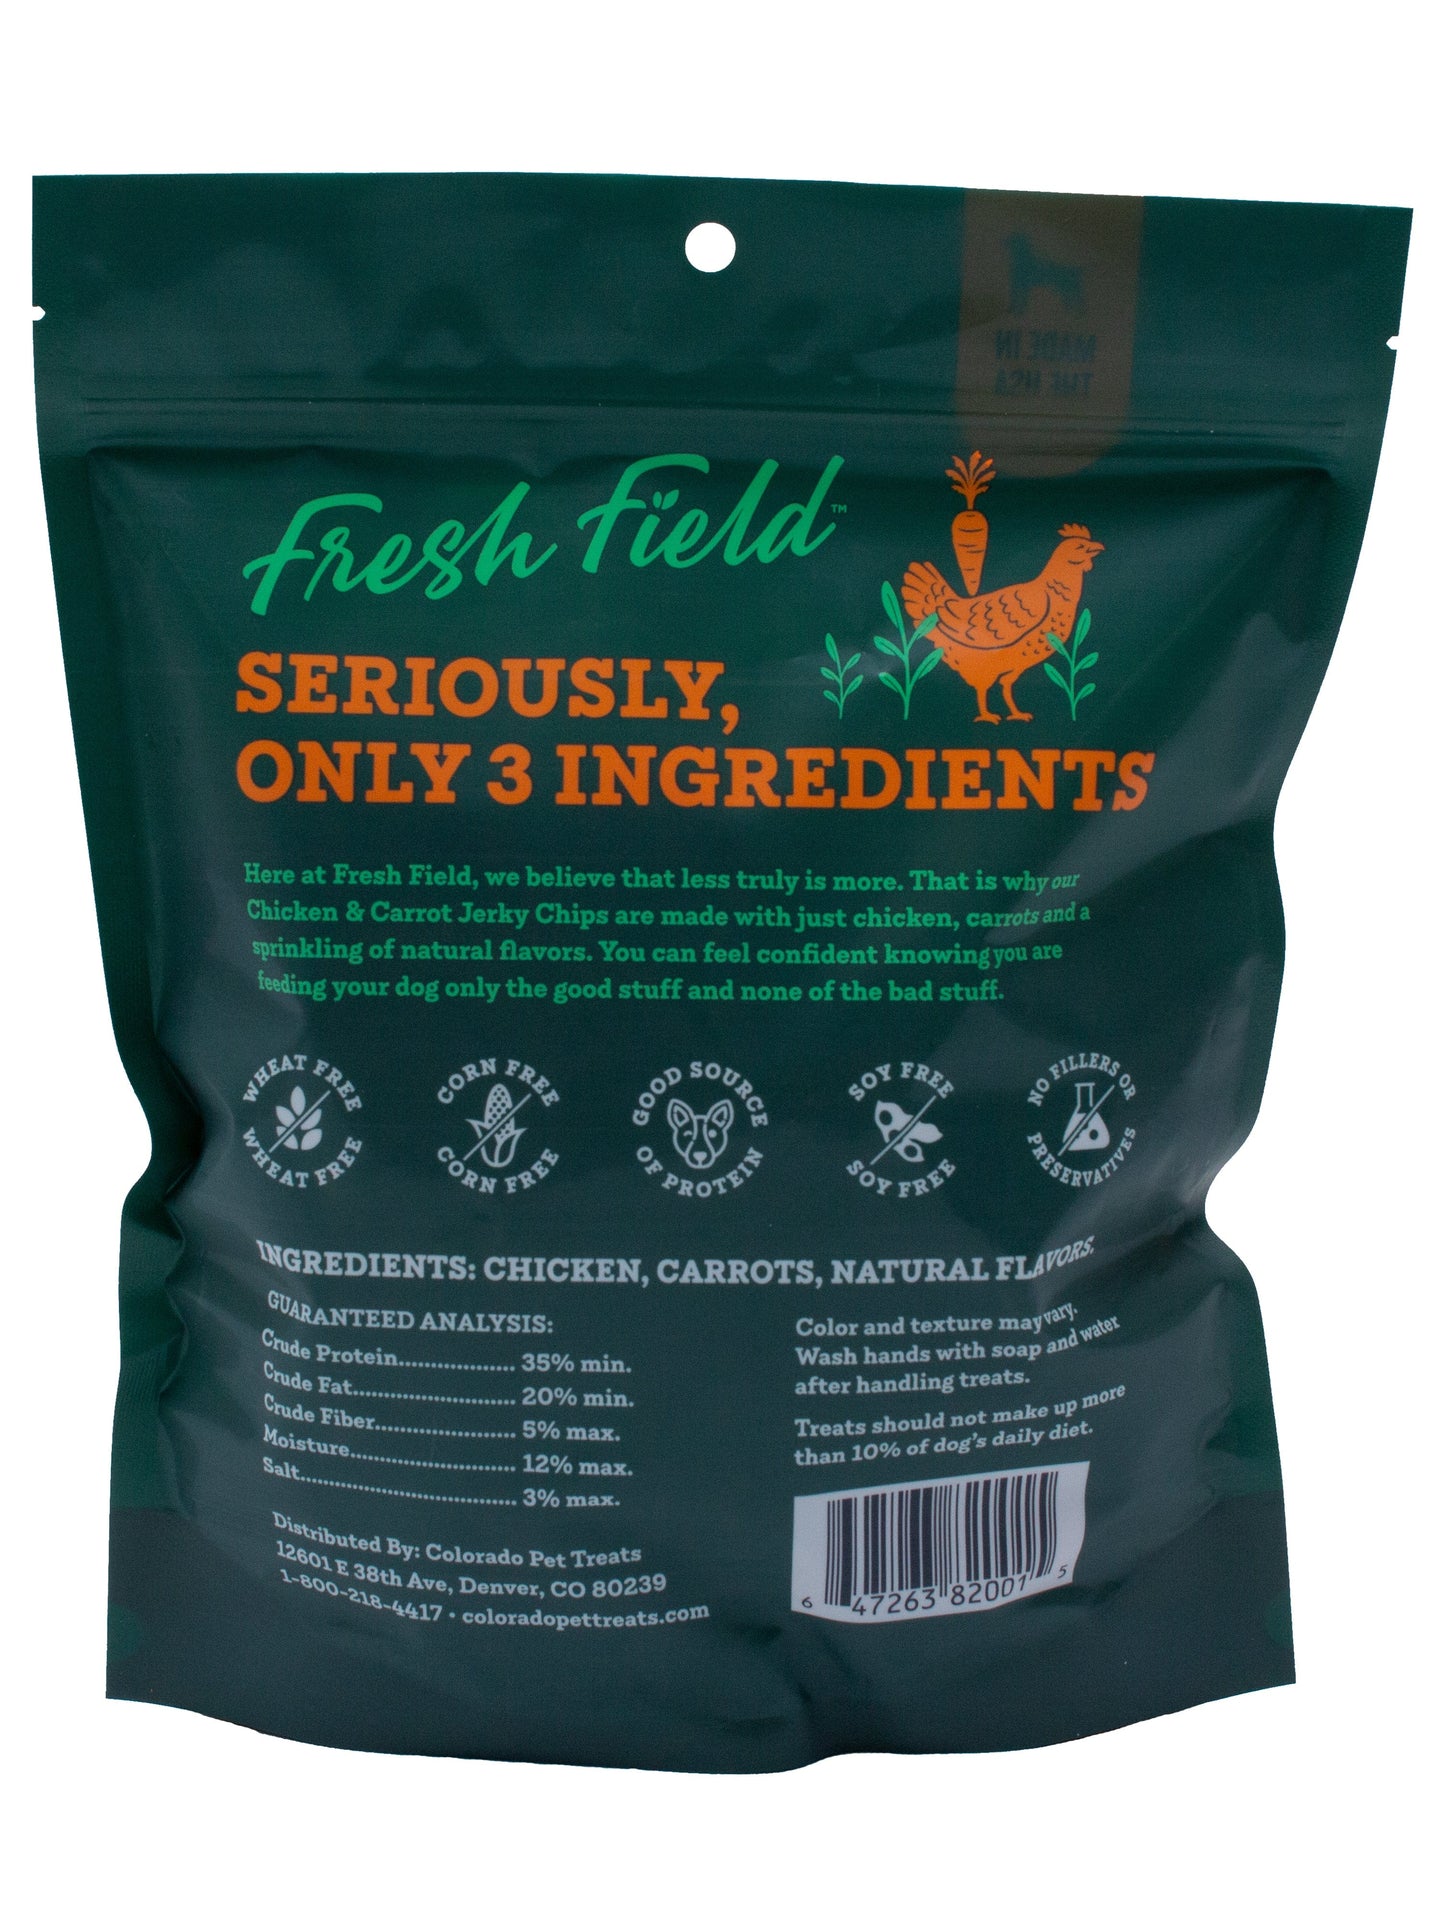 A photo of the back of the best 14 oz Chicken and Carrot Jerky Chips Dog Treats from Colorado Pet Treats by Fresh Field. Colorado Pet Treats - All-Natural, All-American Dog Jerky, Jerky Chips, and Bones - Treat your furry friend to our delicious and healthy pet treats made with only the finest ingredients sourced in the USA. The best crunchy and savory jerky chips made with all-natural ingredients and baked to perfection.